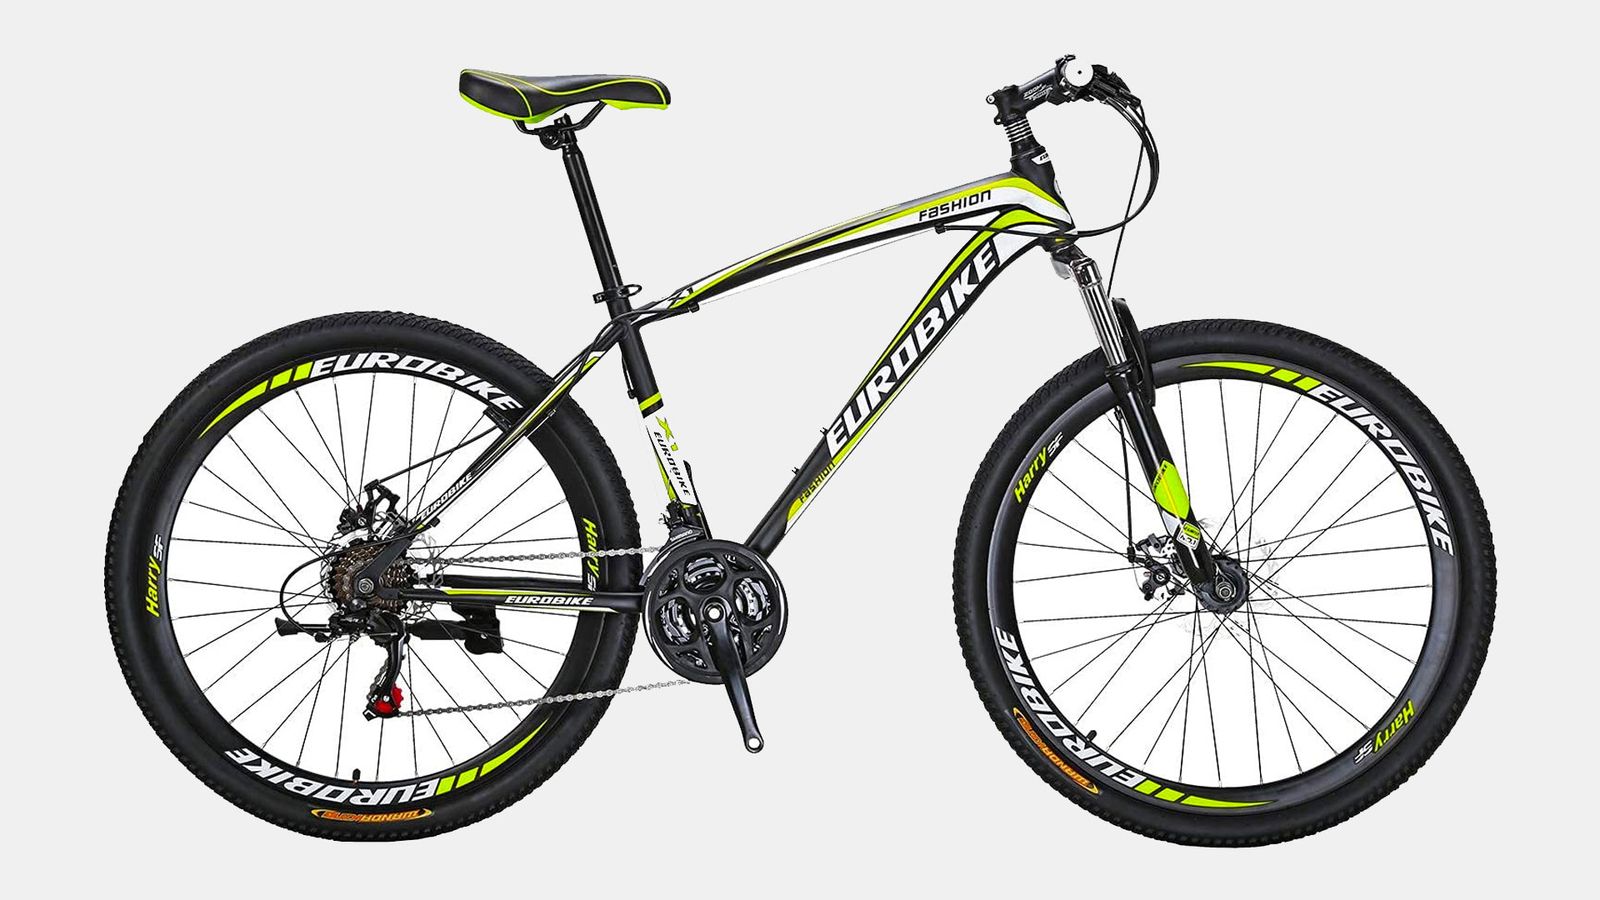 Best mountain bike Eurobike product image of a black bike with yellow and white details.